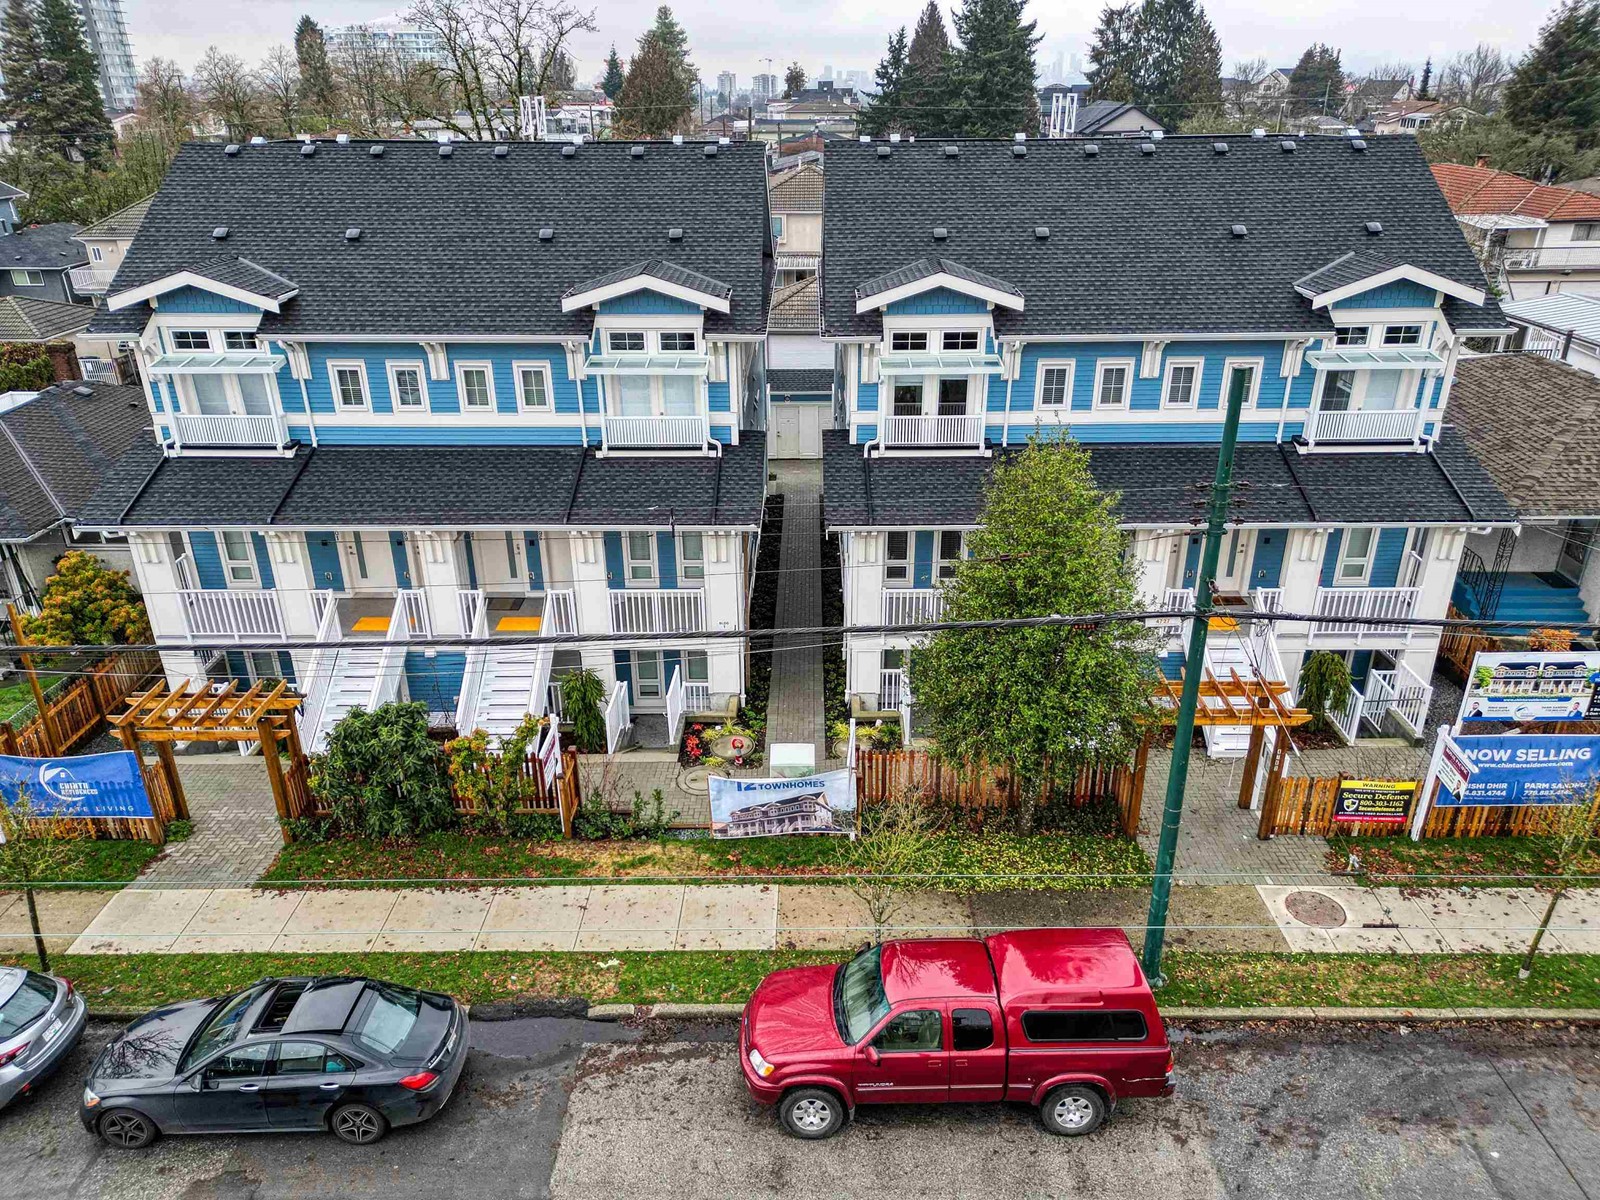 4795 SLOCAN STREET located in Vancouver, British Columbia